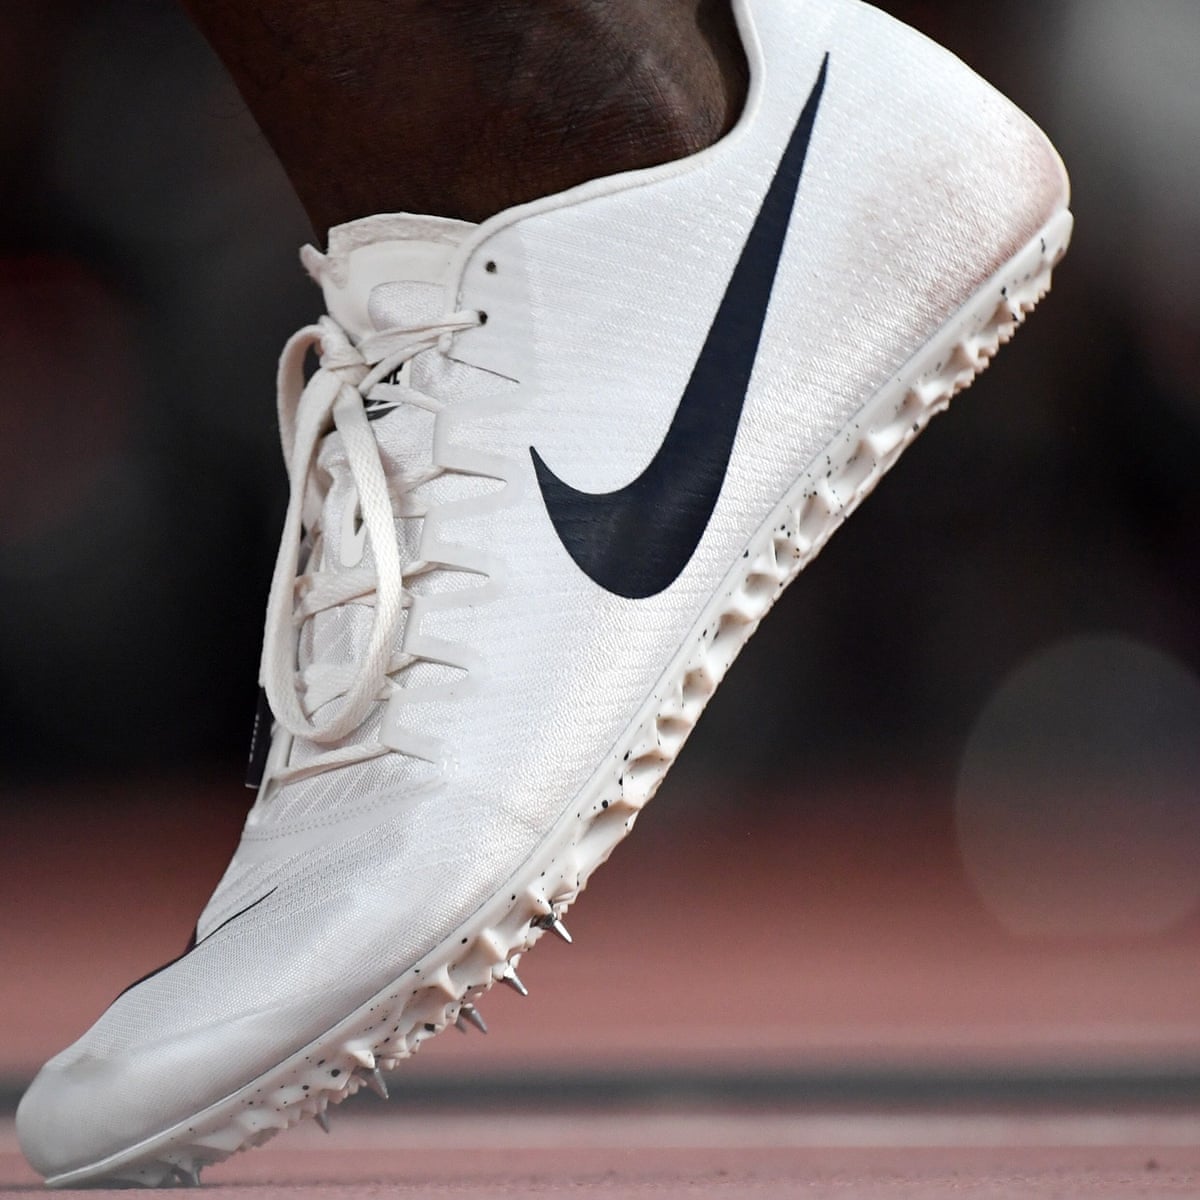 Nike: the most and naive company the entire world of sport | Alberto Salazar | The Guardian